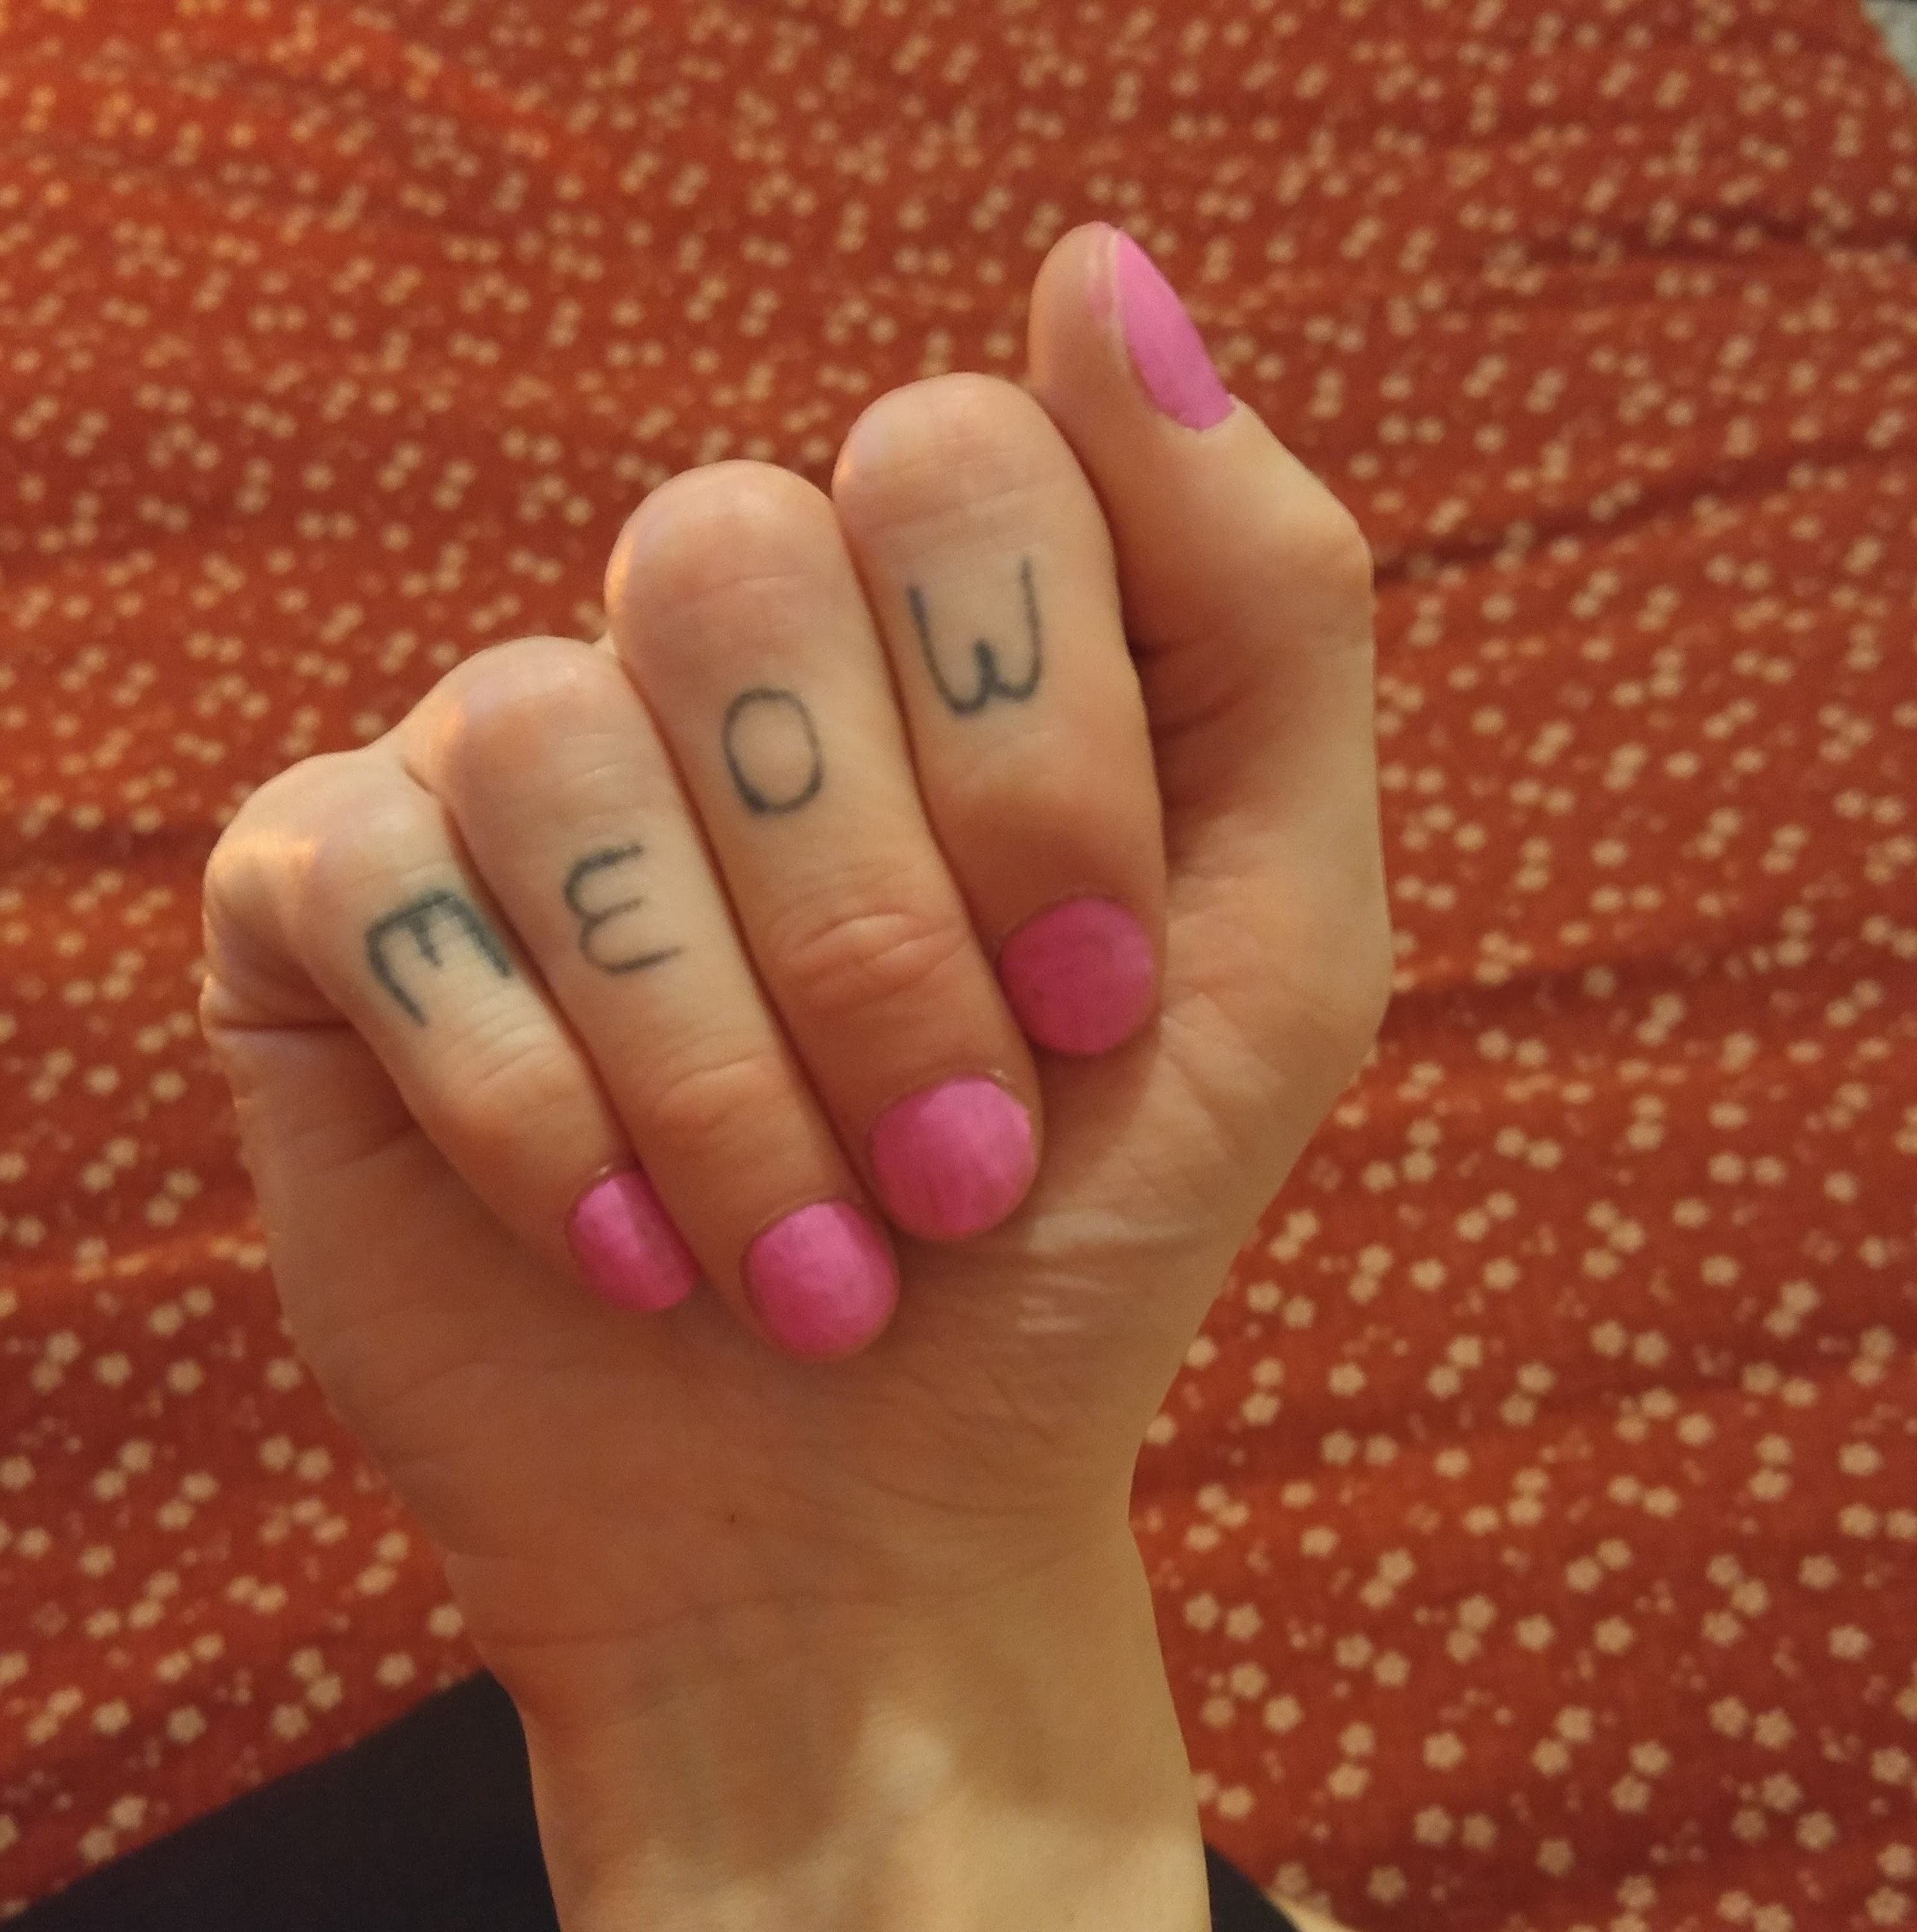 Kabutroid's right hand with the word meow tattooed on the fingers